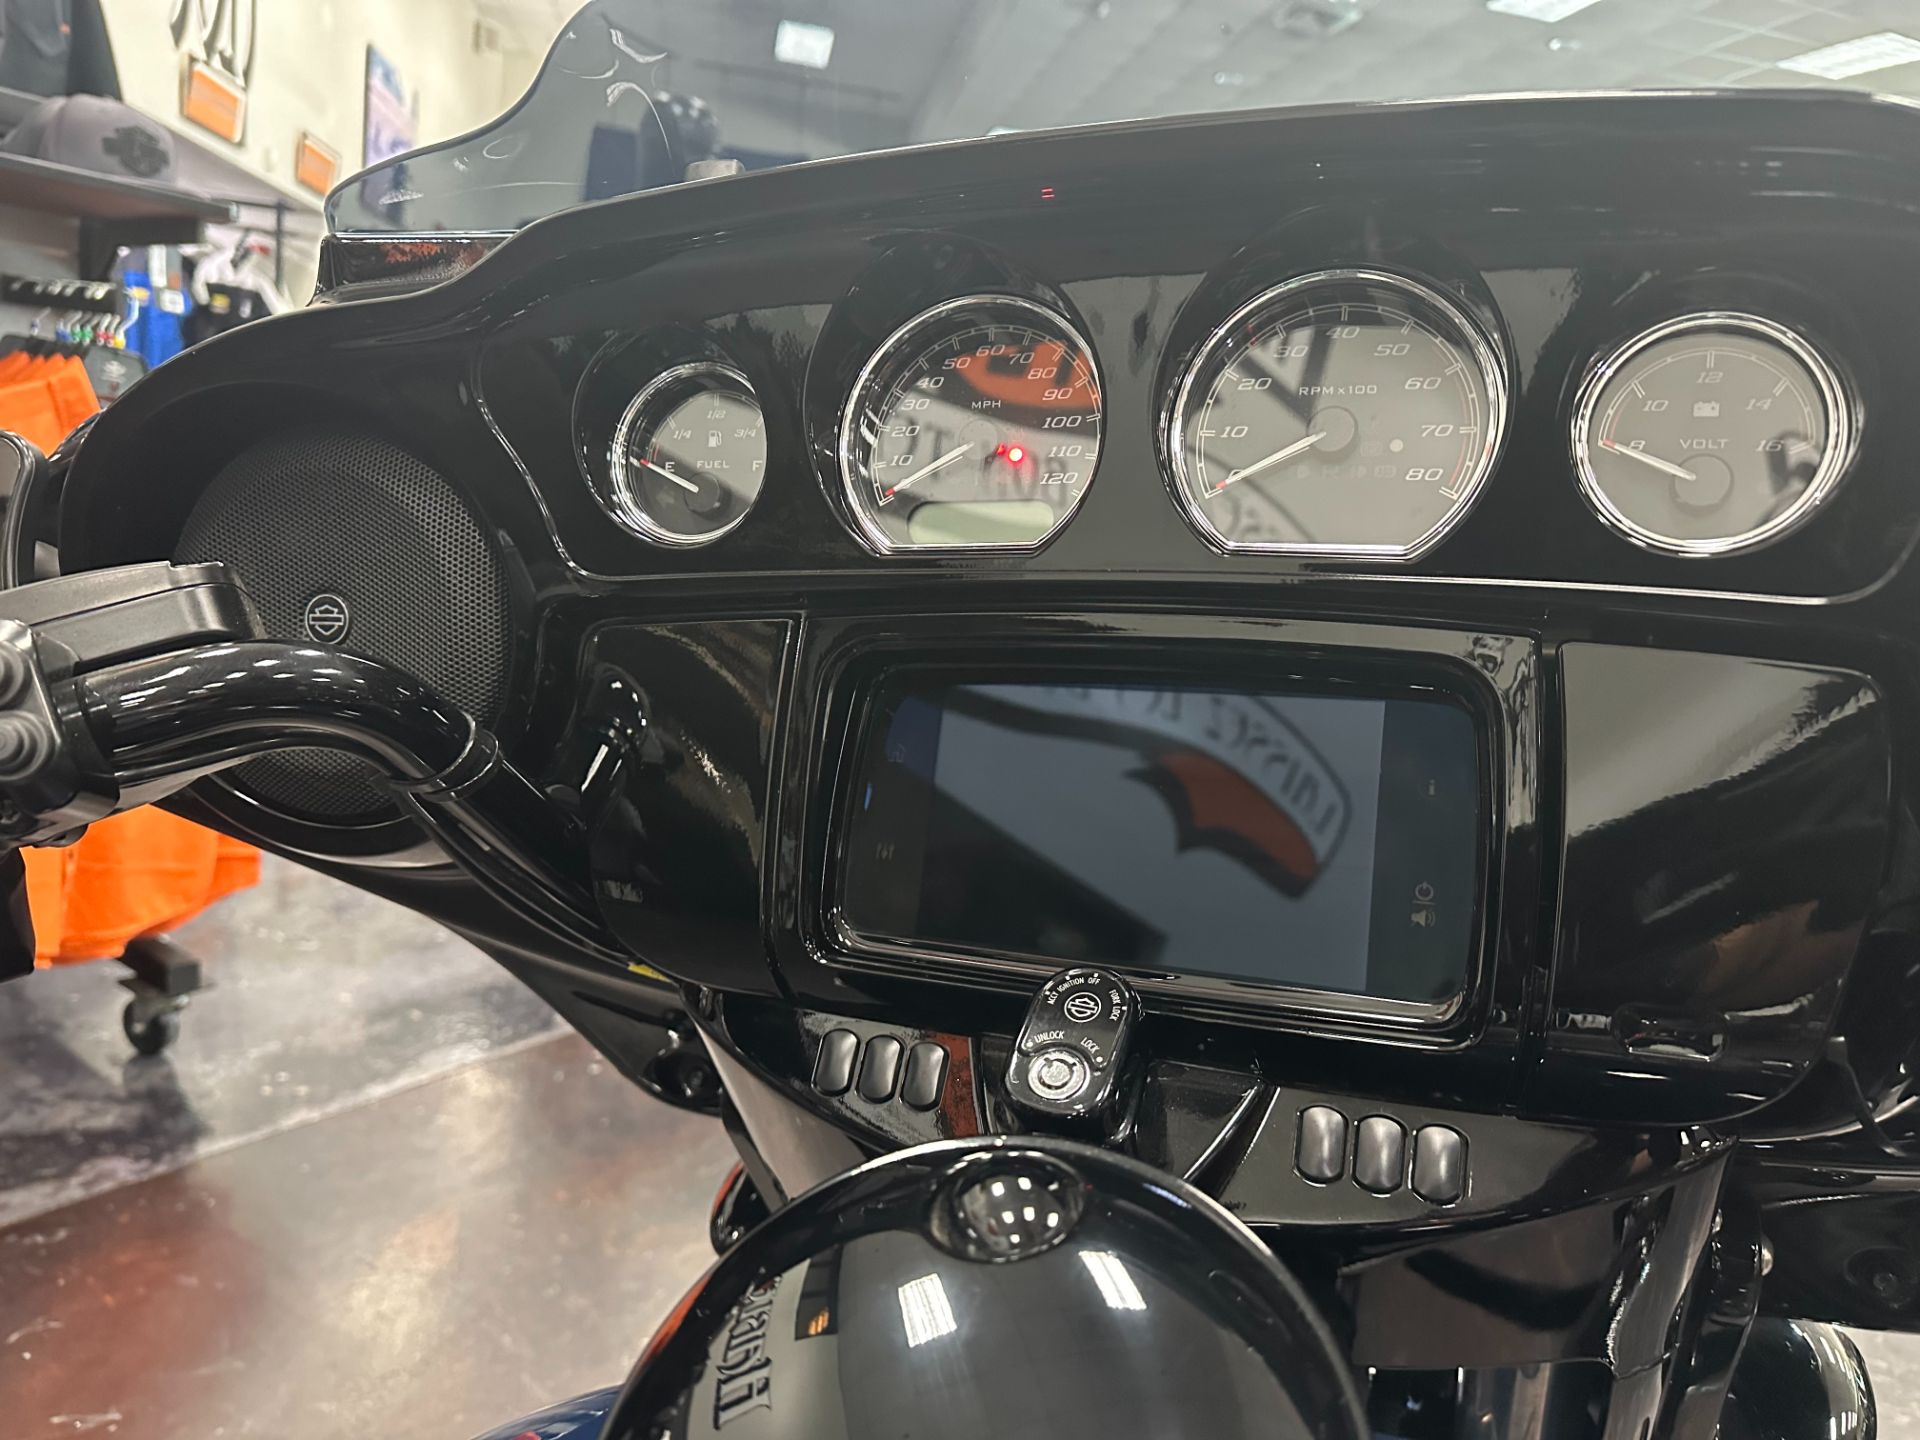 2019 Harley-Davidson Street Glide® Special in Metairie, Louisiana - Photo 12